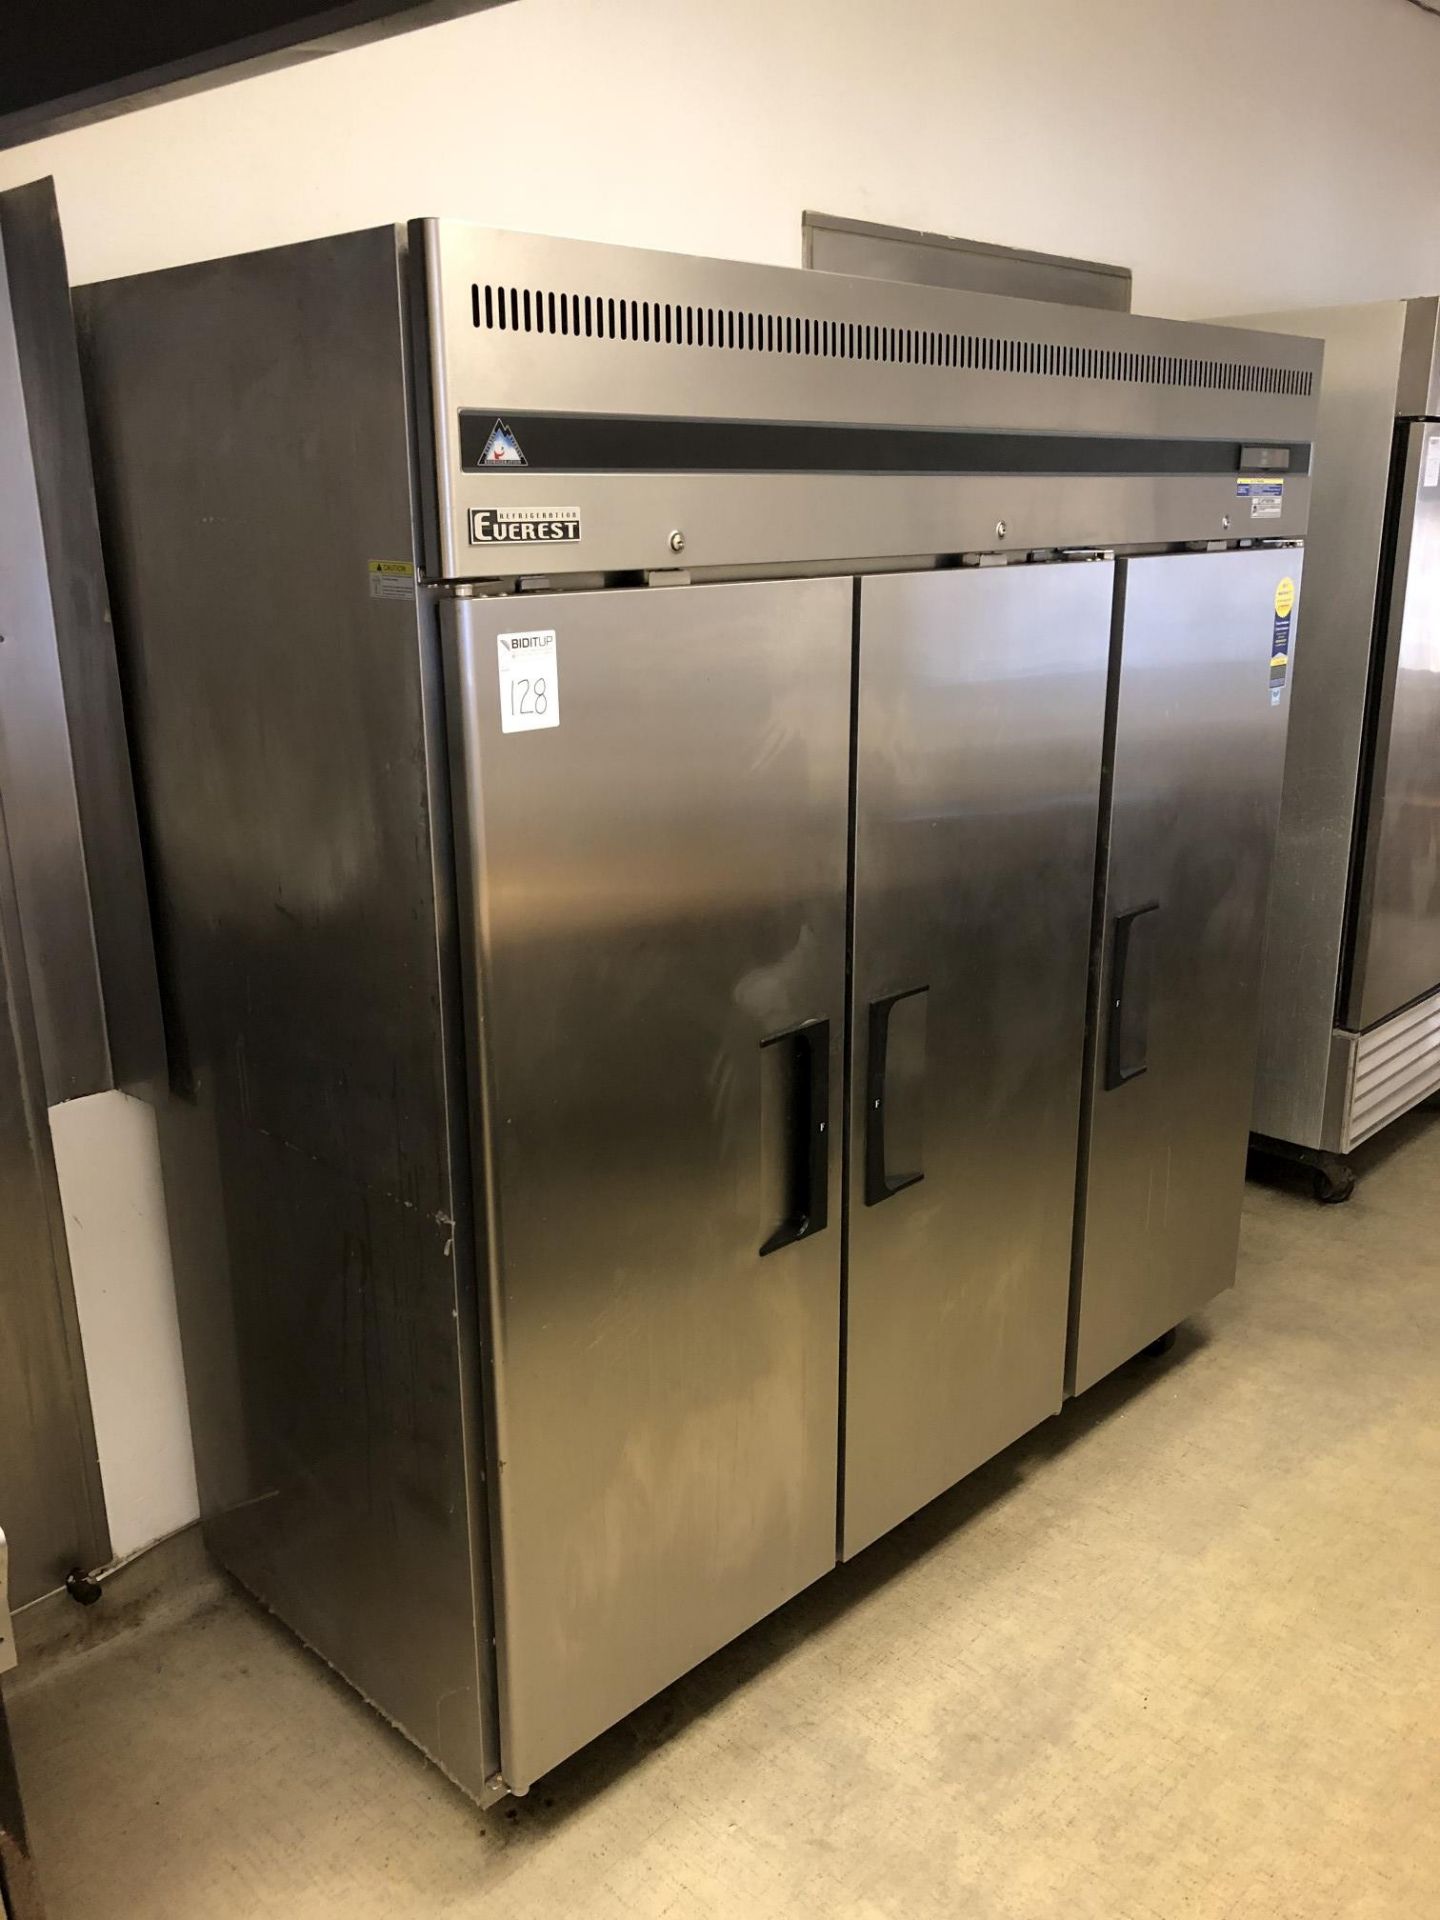 Everest Three Section Reach-In Freezer, Model ESF3